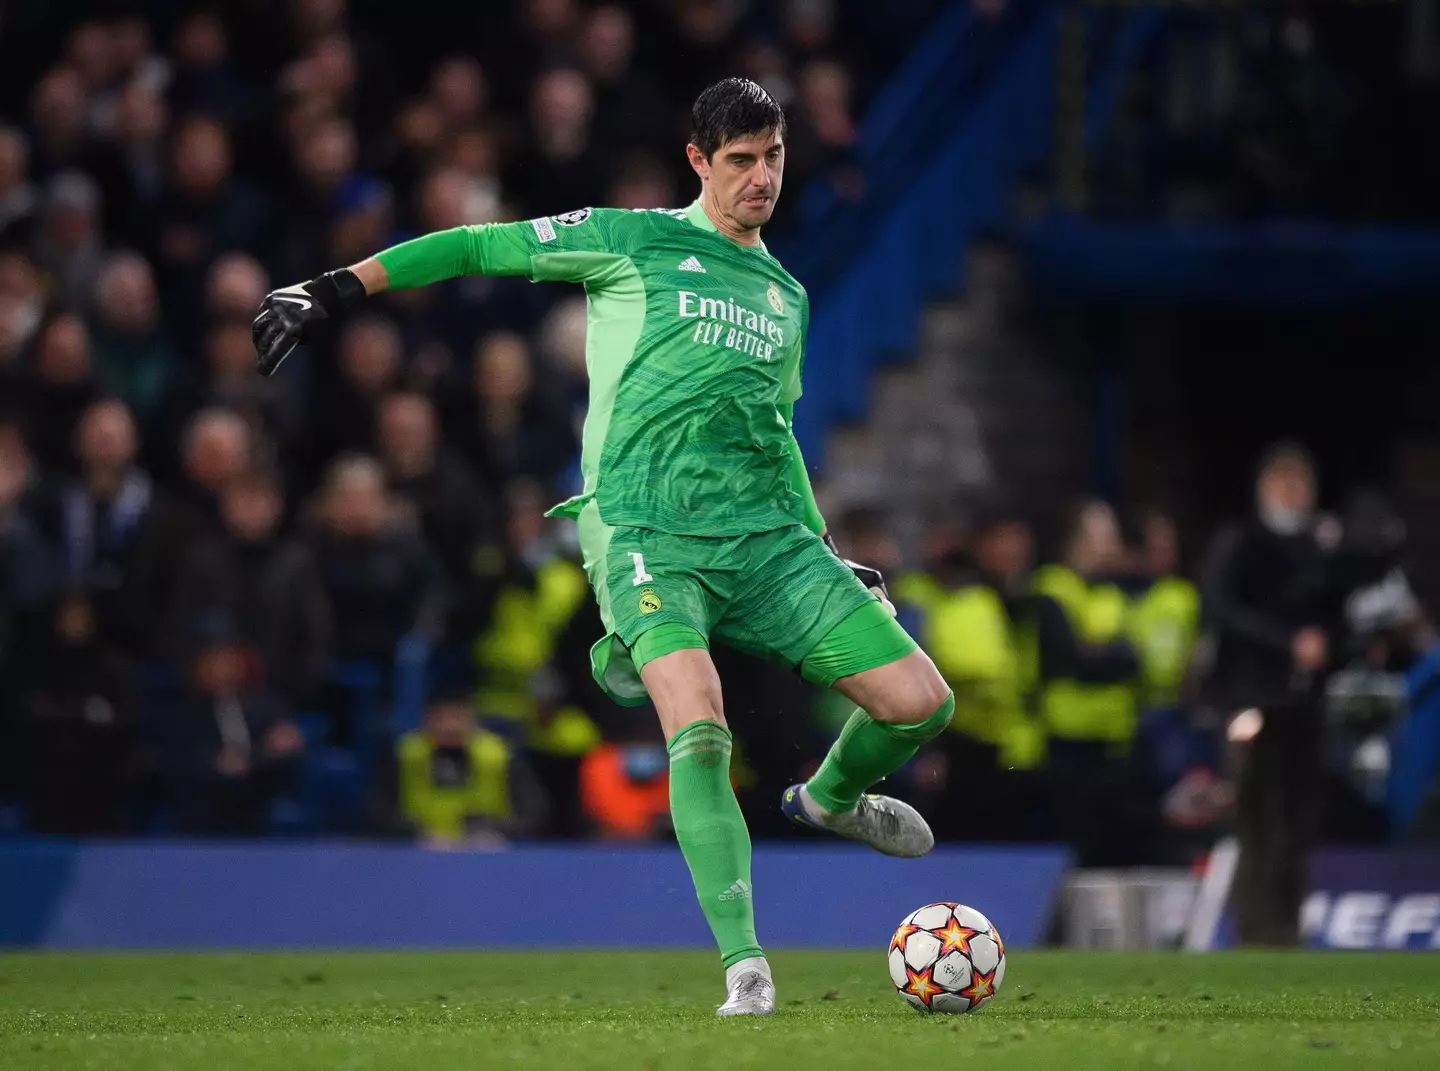 Courtois finished seventh in the Ballon d'Or standings (Image: Alamy)